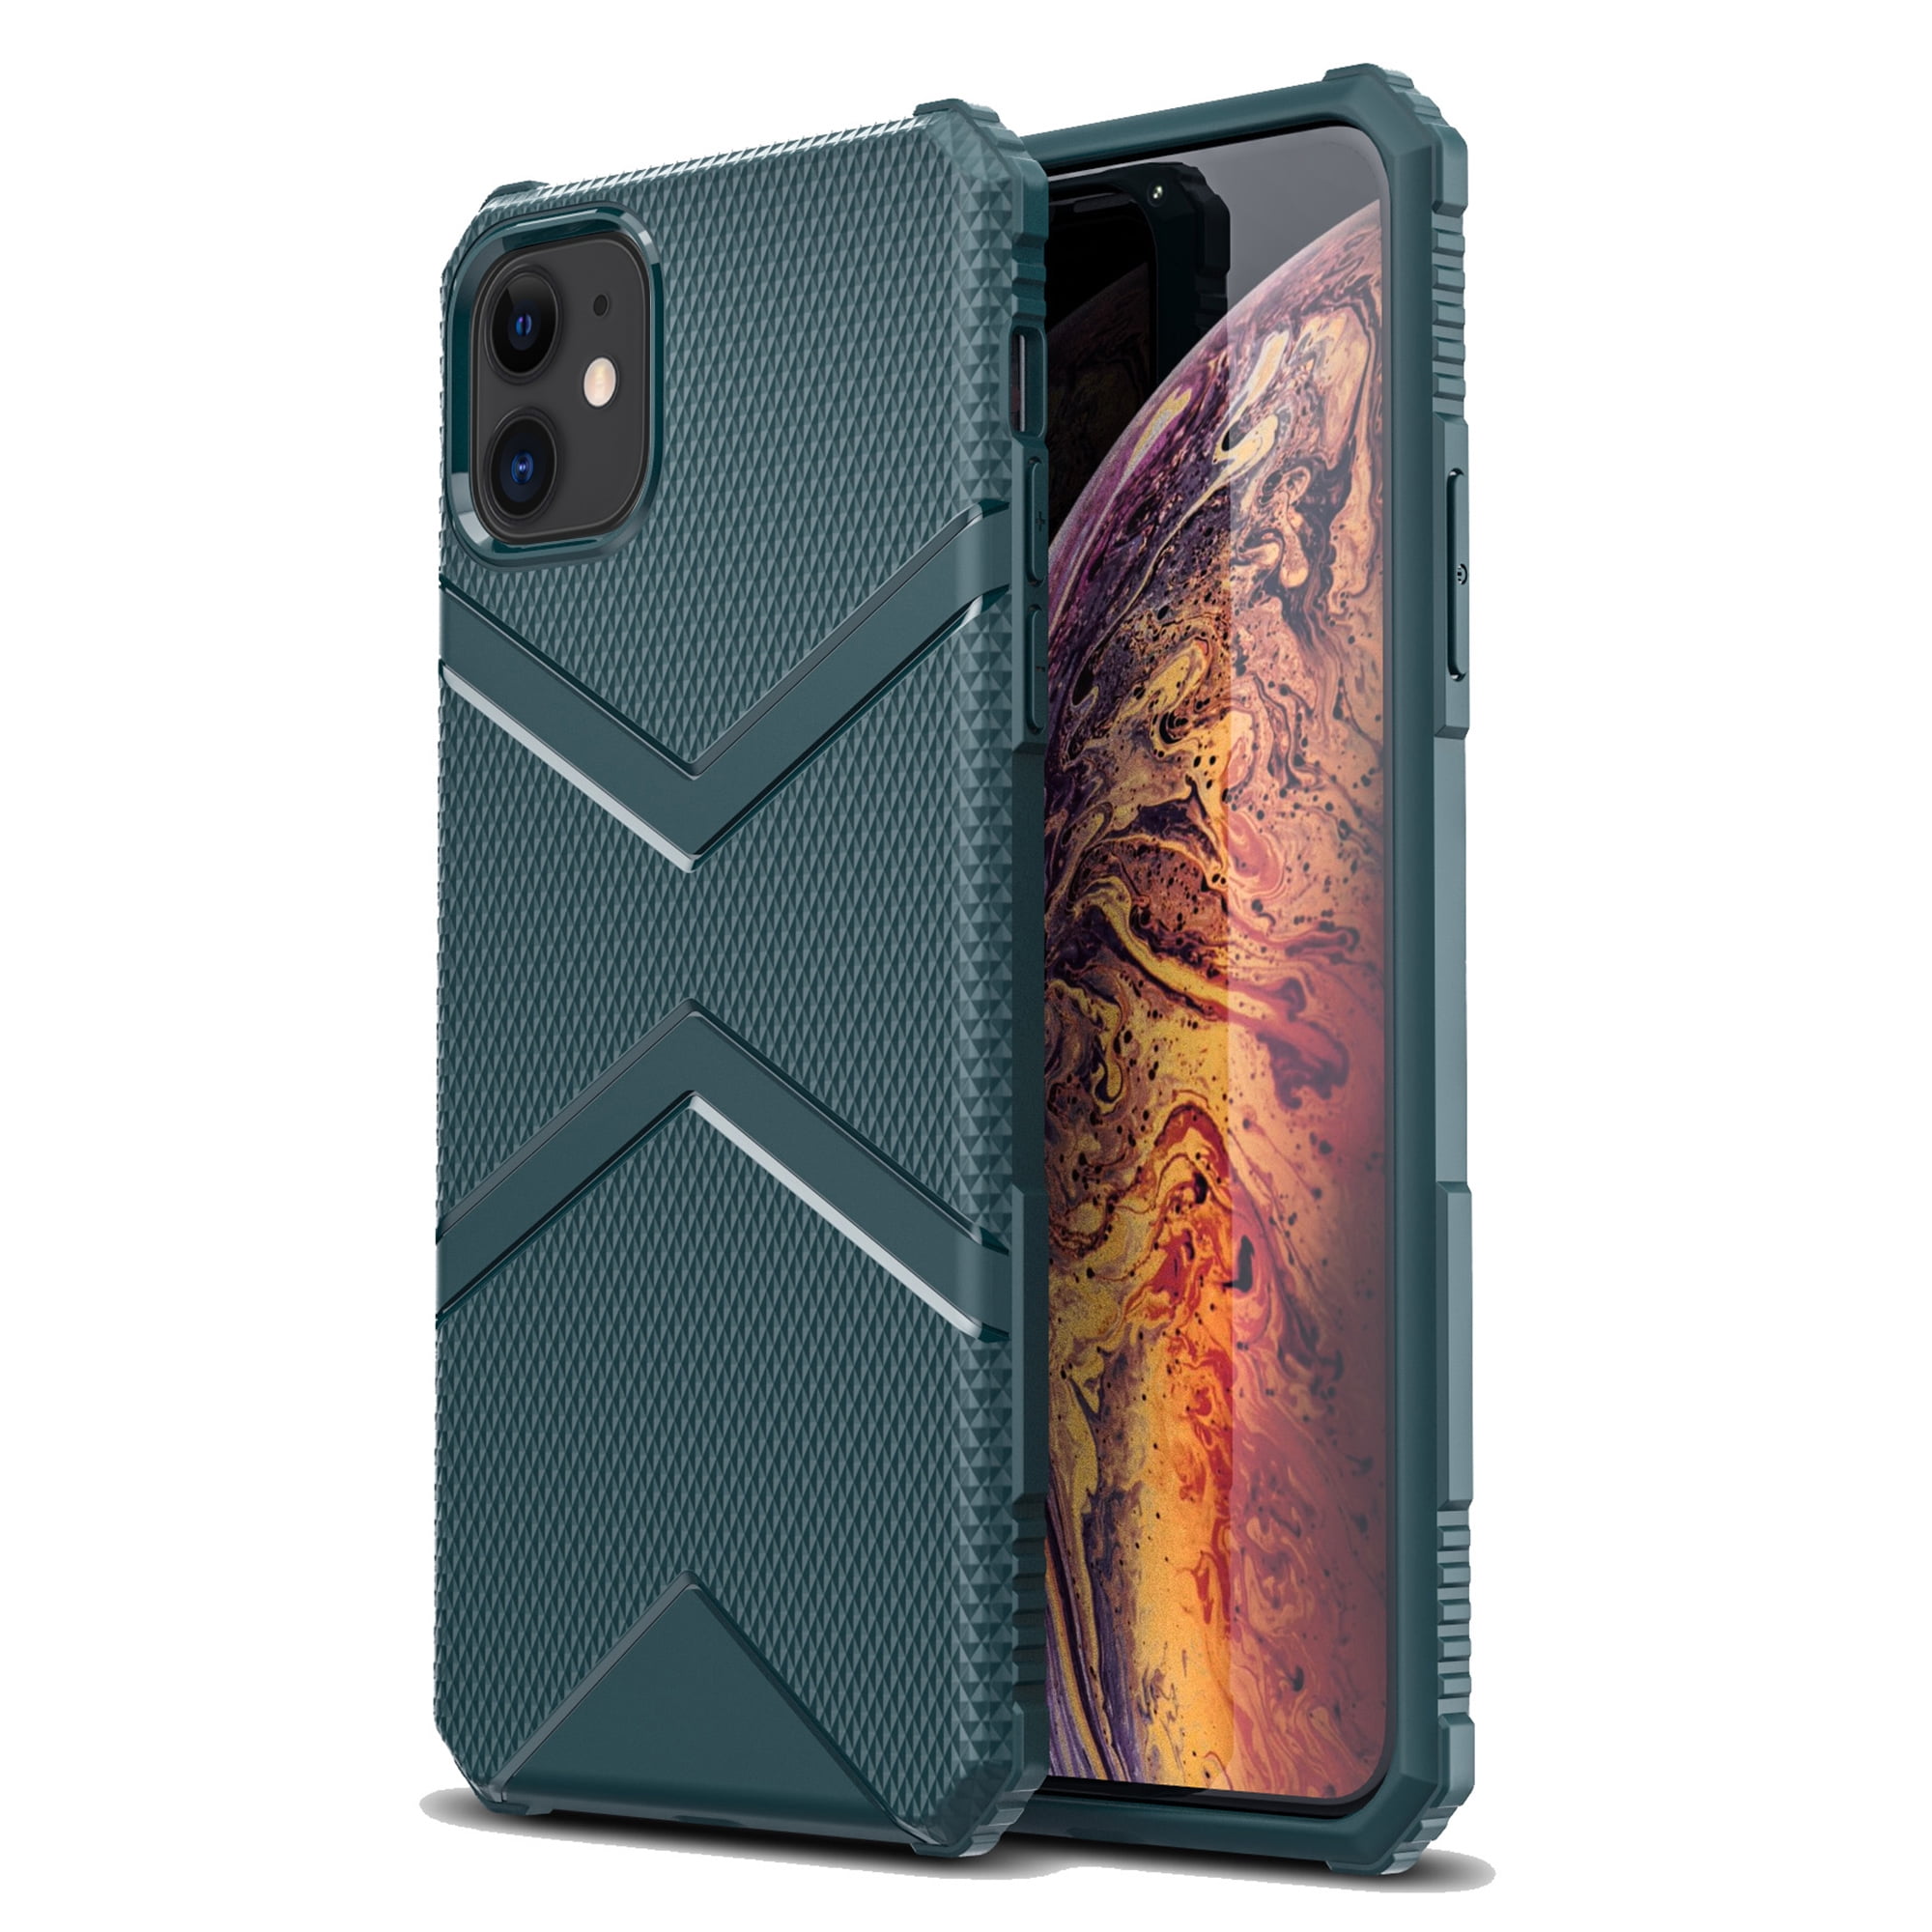 Apple Iphone 11 Phone Case 3d Texture Grip Fiber Minimalist Hybrid Real Body Armor Rubber Shockproof Frame Bumper 4 Corner Non Slip Strongest Durable Case Green Cover For Apple Iphone 11